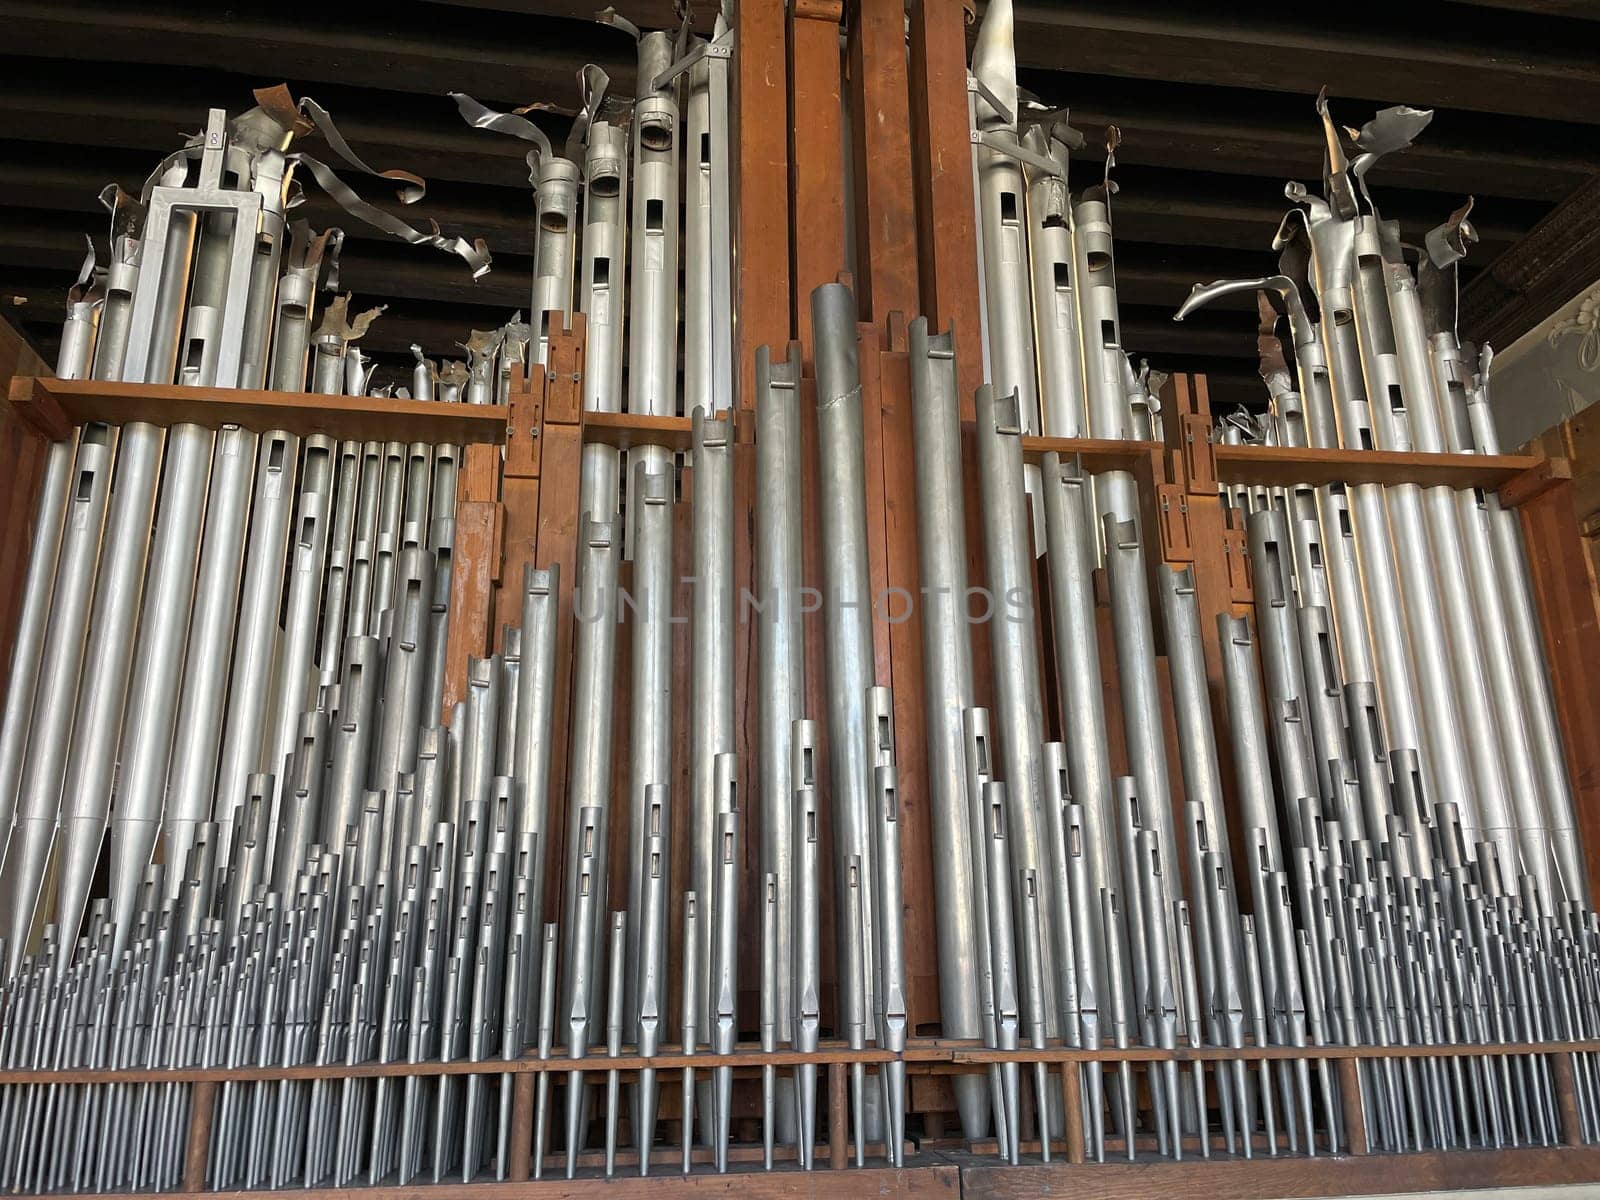 The organ is the largest brass keyboard musical instrument, consisting of a set of pipes by MilaLazo